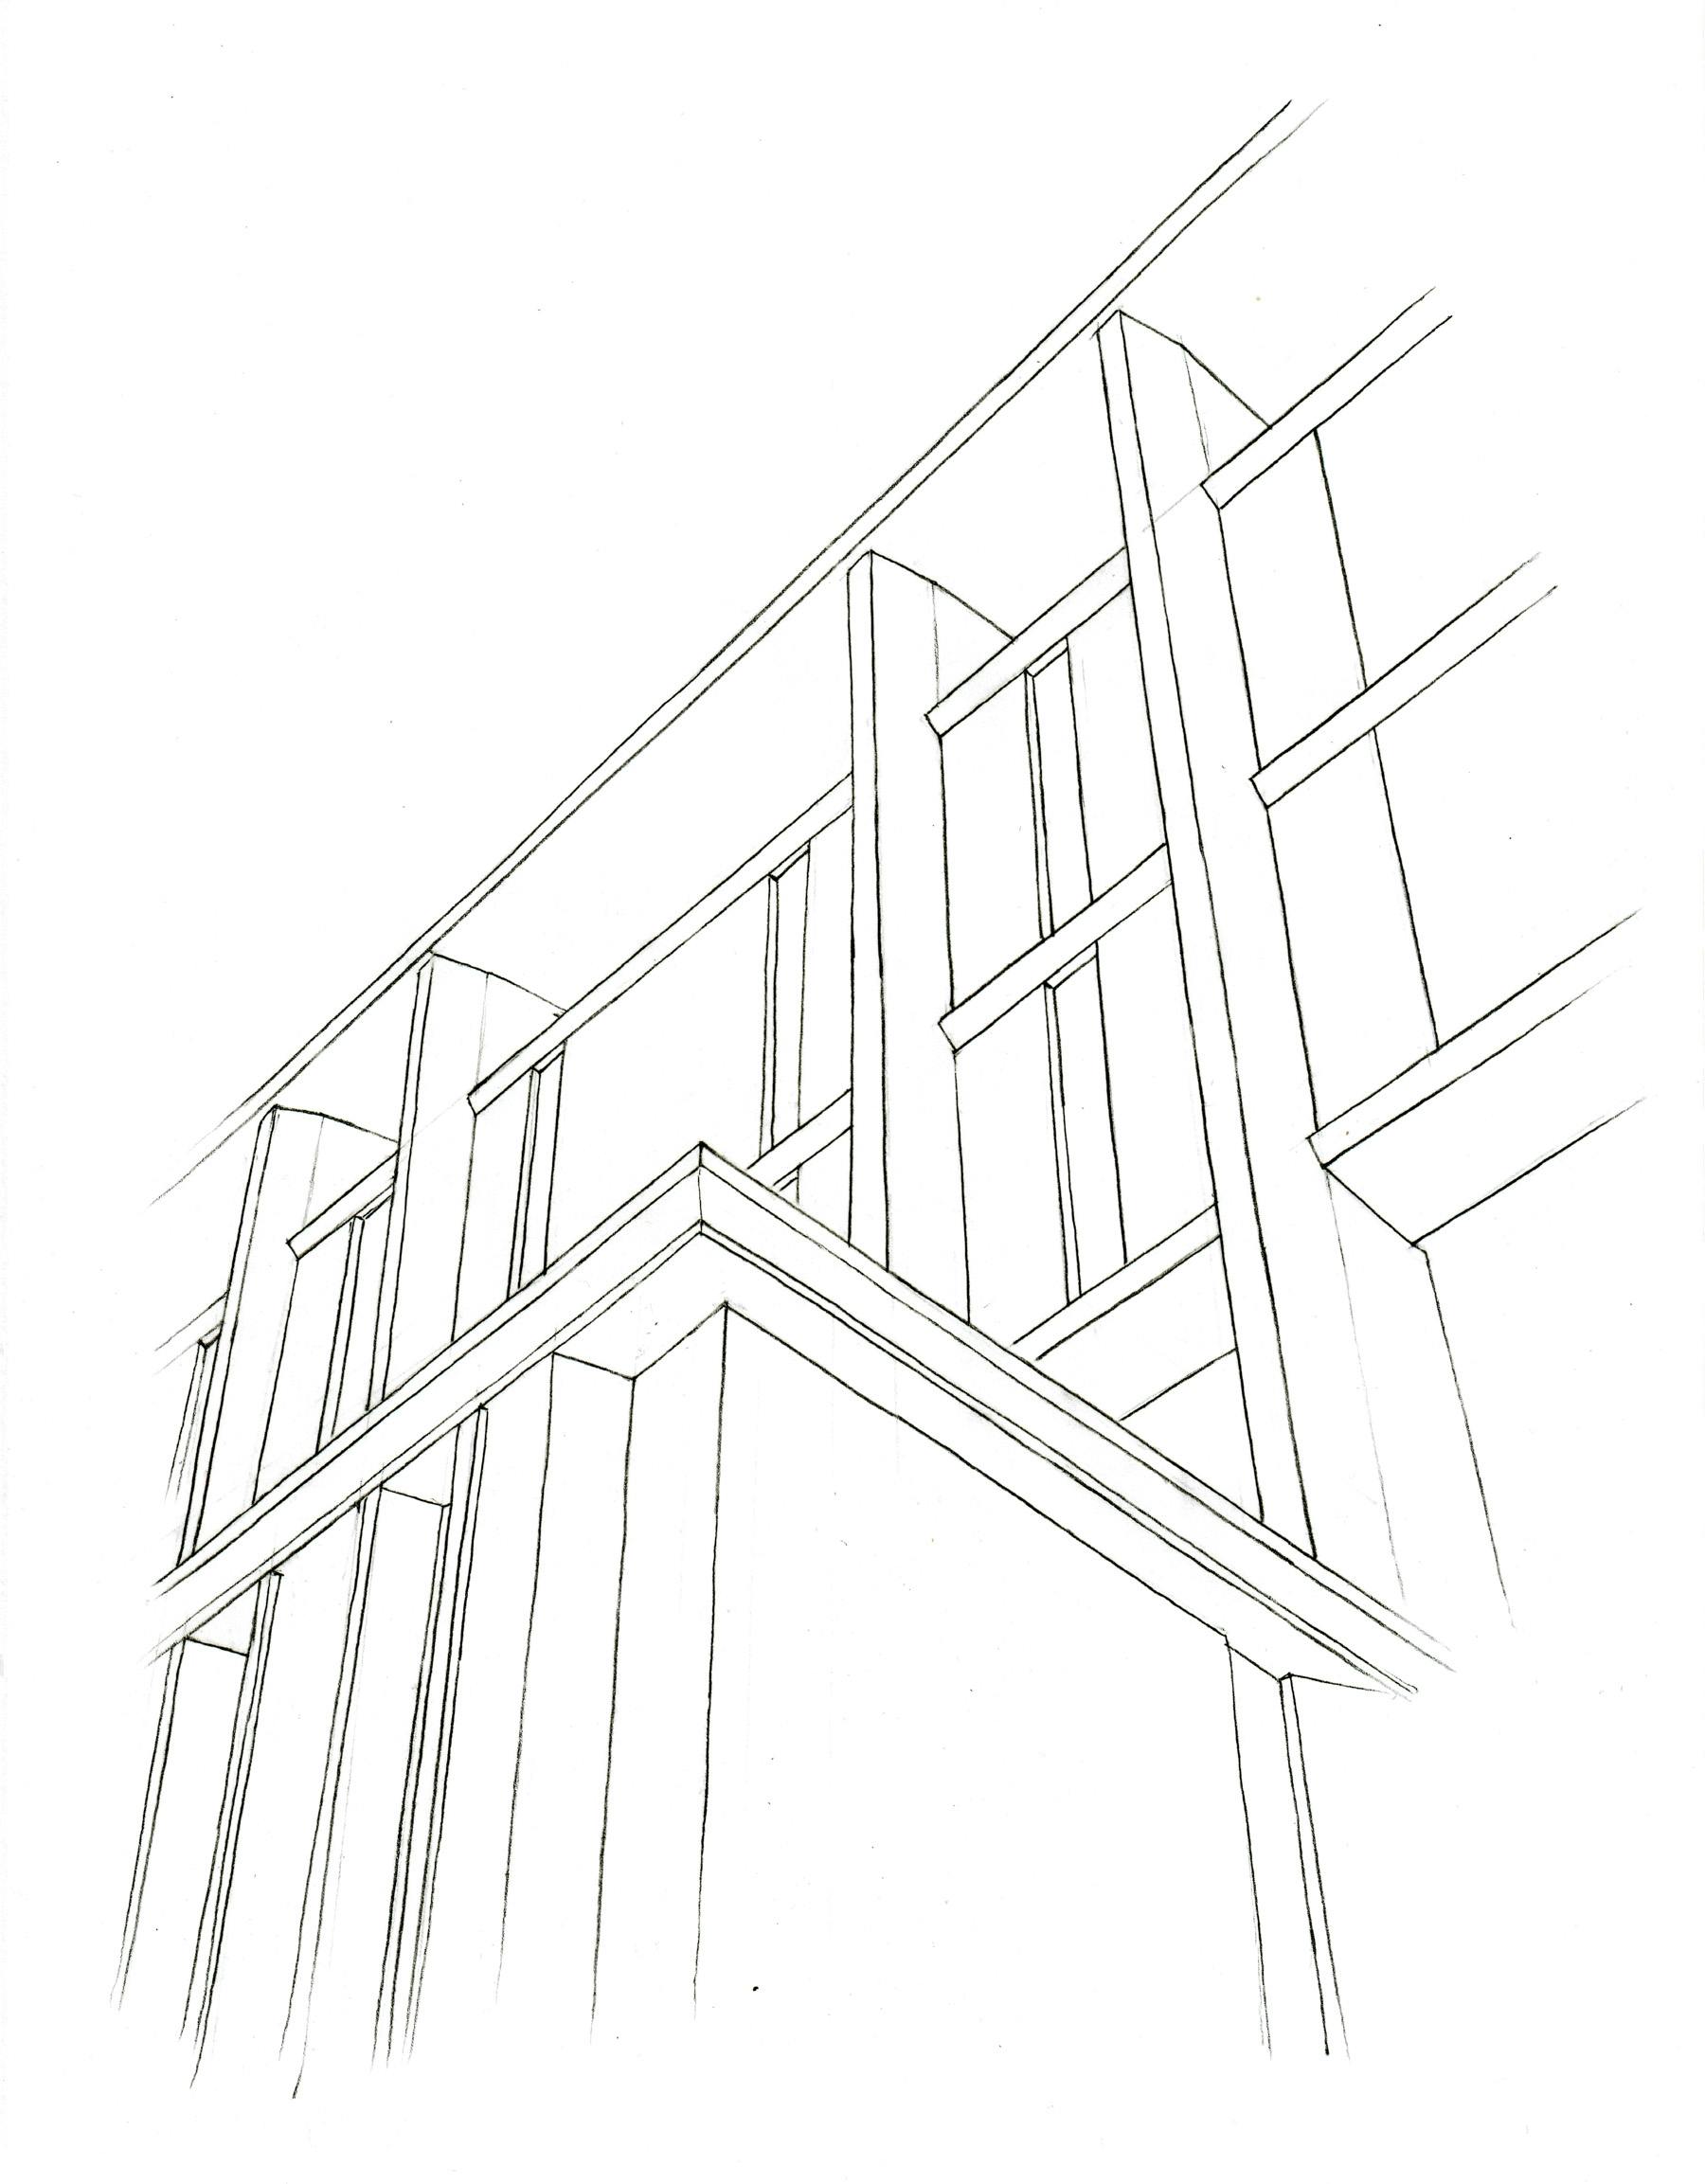 Line drawing of a wall of the John D. Rockefeller Jr. Library as seen from street level.